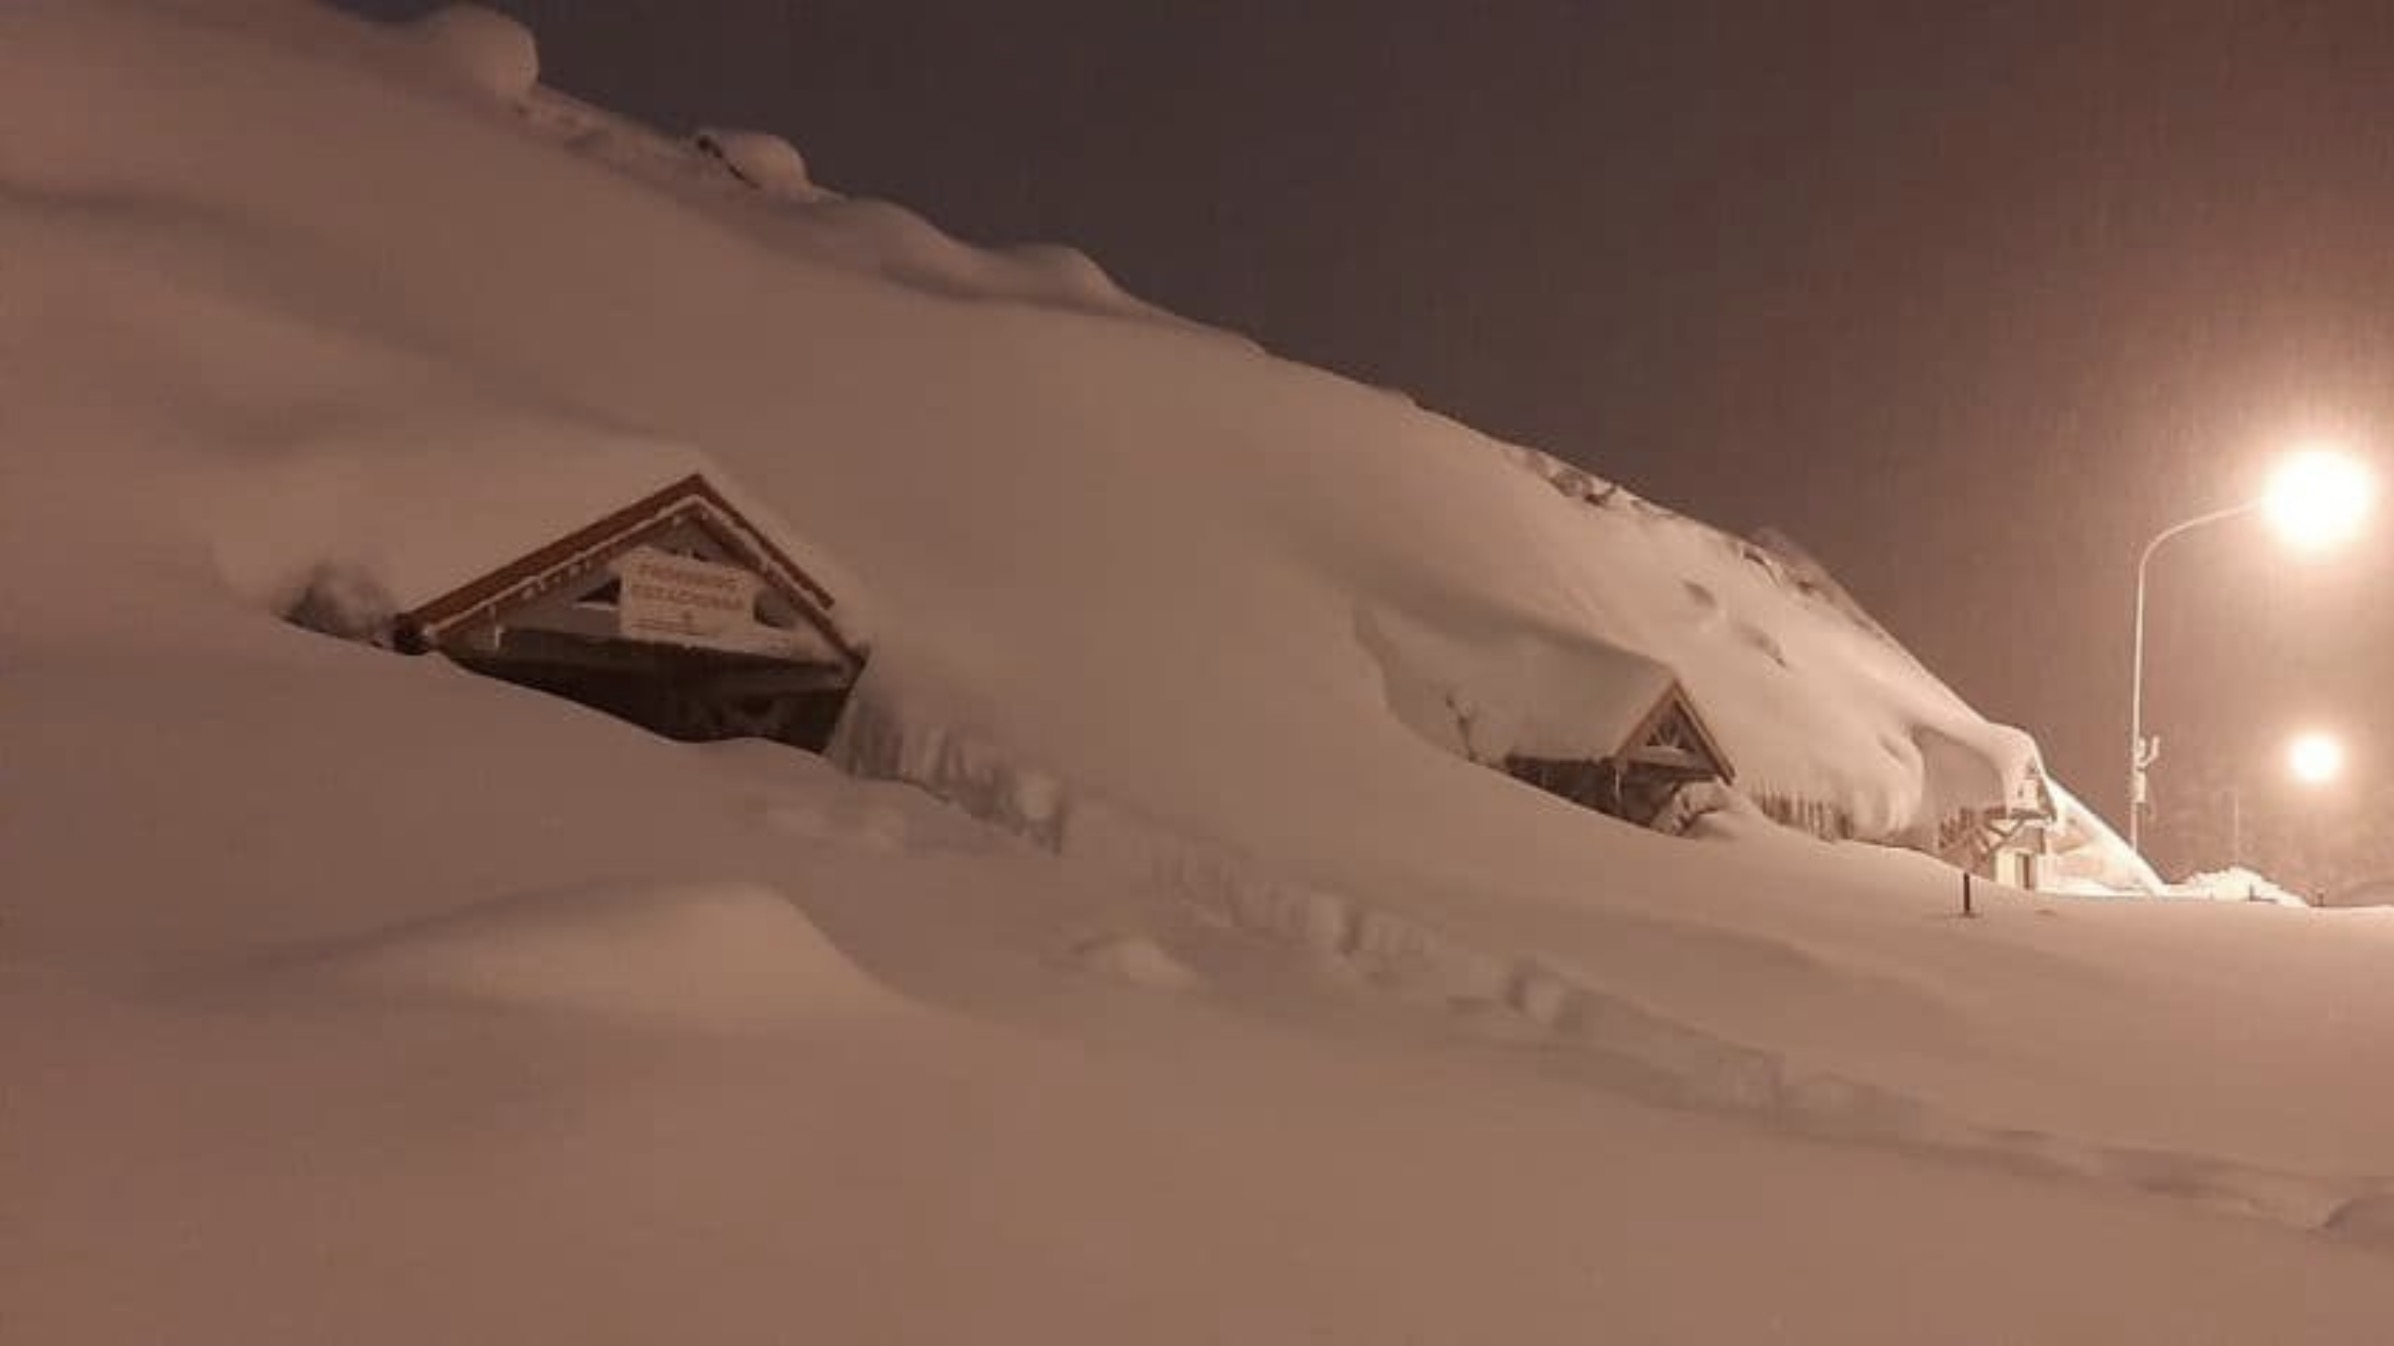 south-american-ski-resorts-experience-record-breaking-snow-but-remain